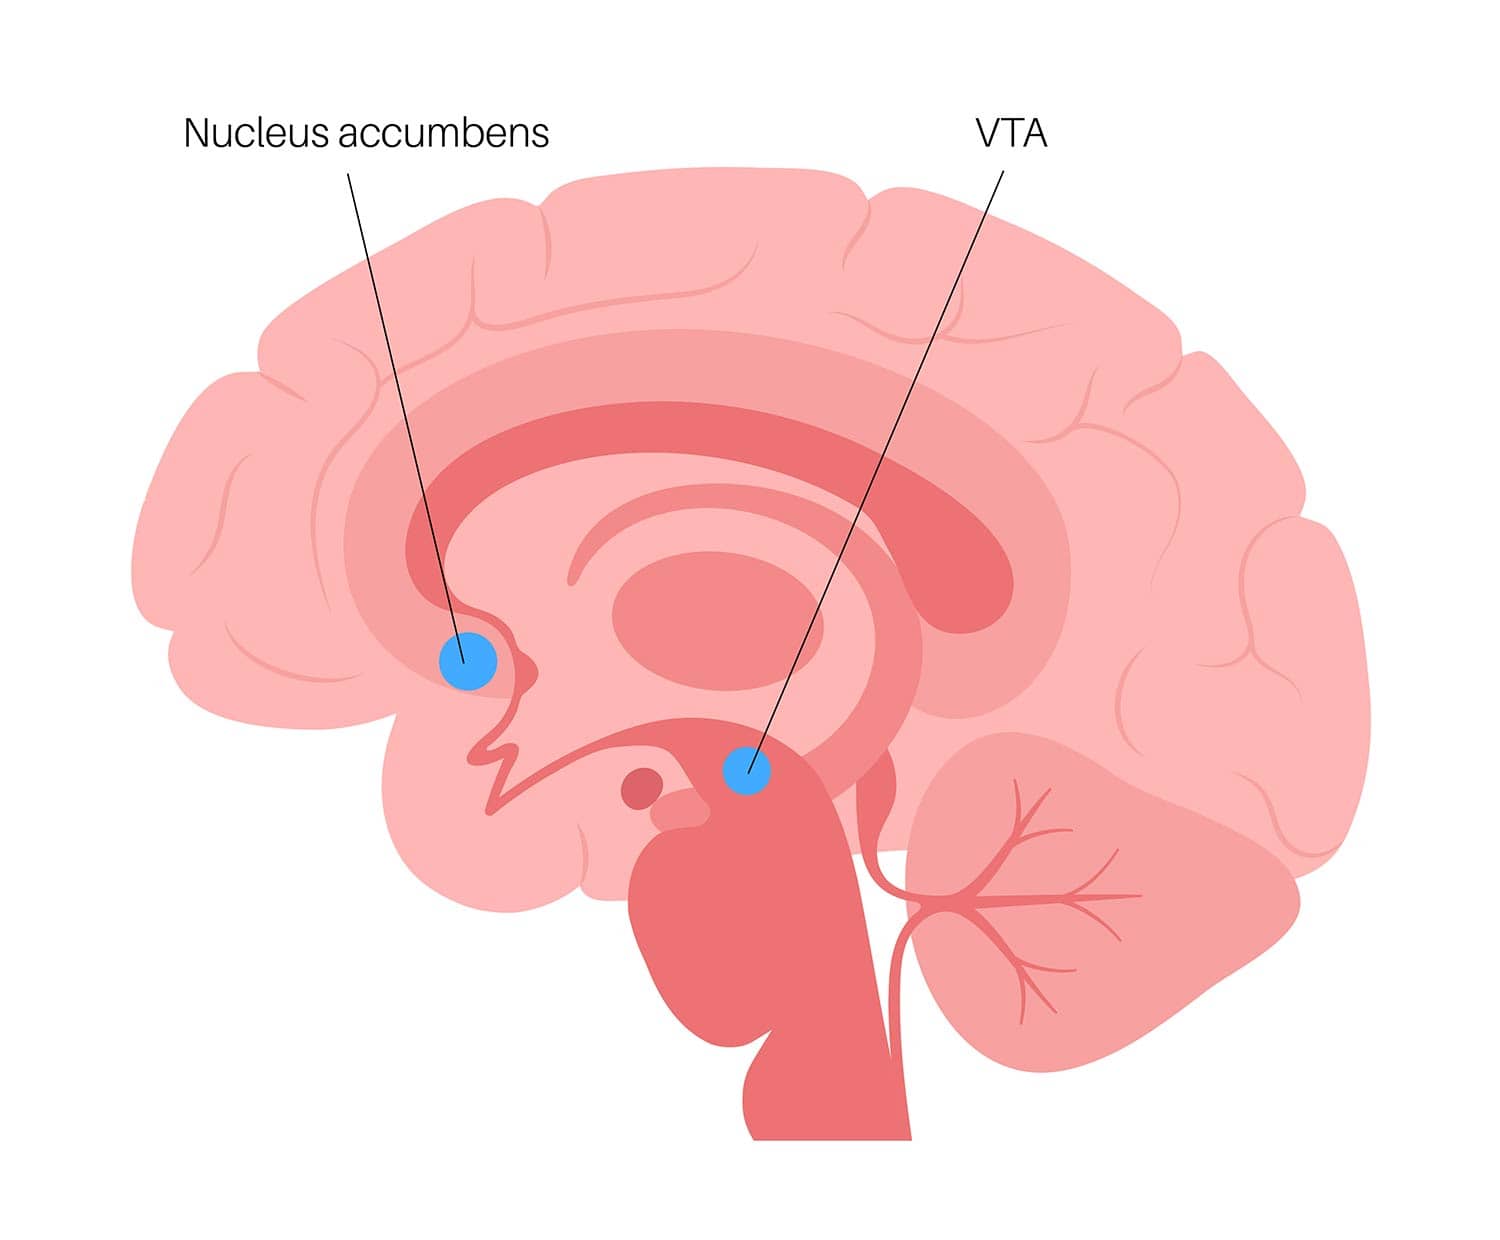 Where is the nucleus accumbens located